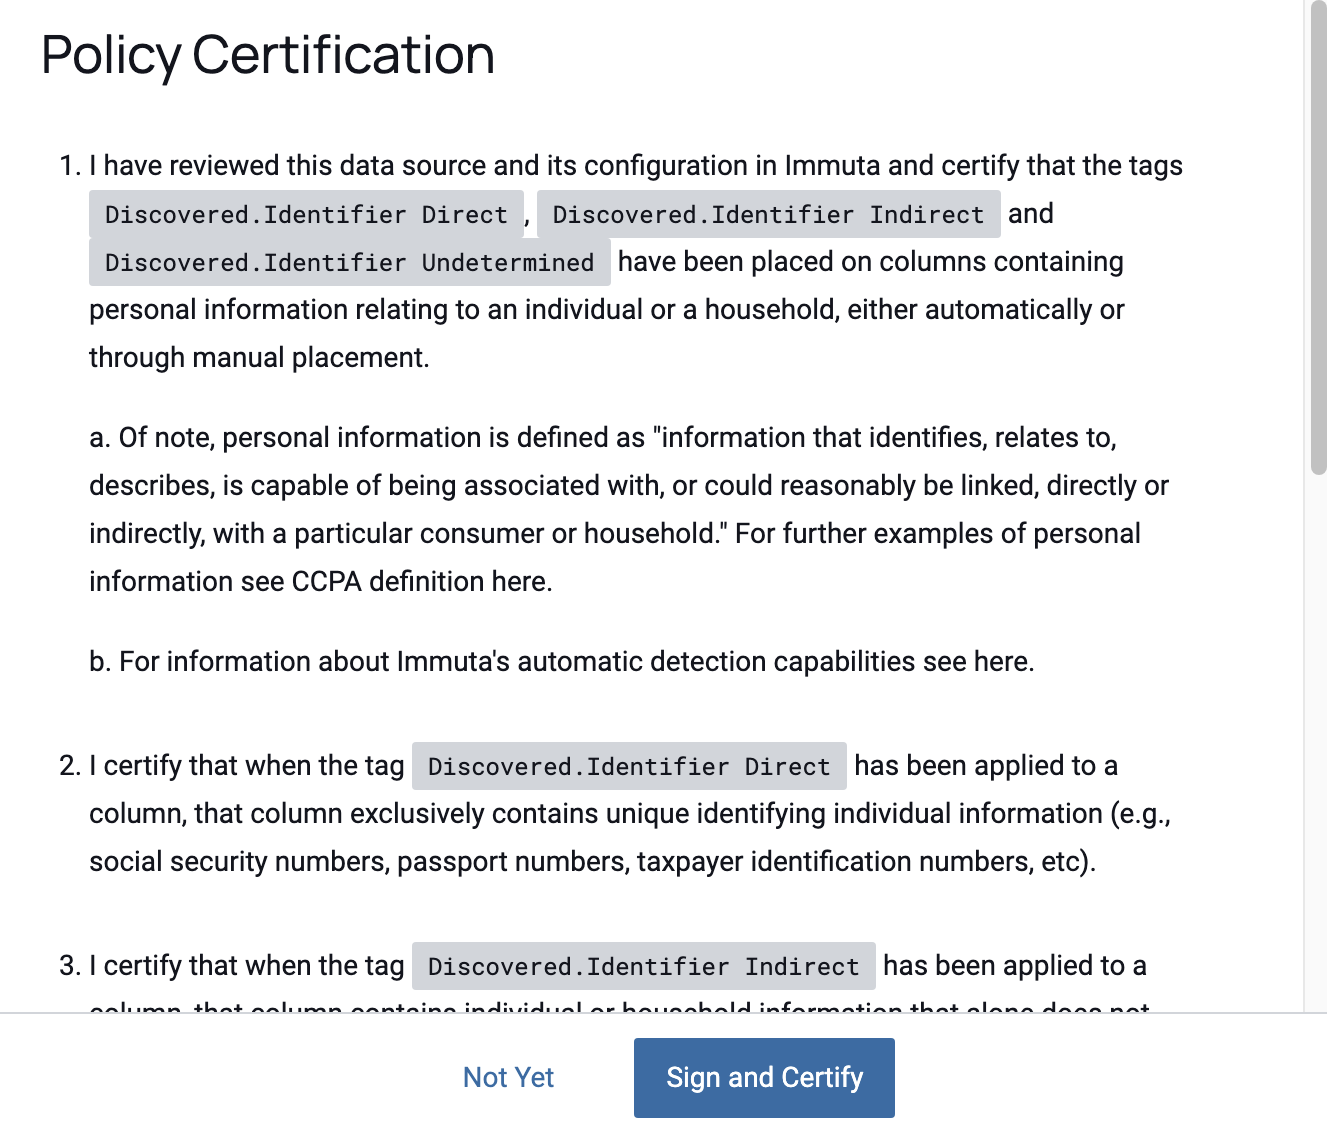 Policy Certification